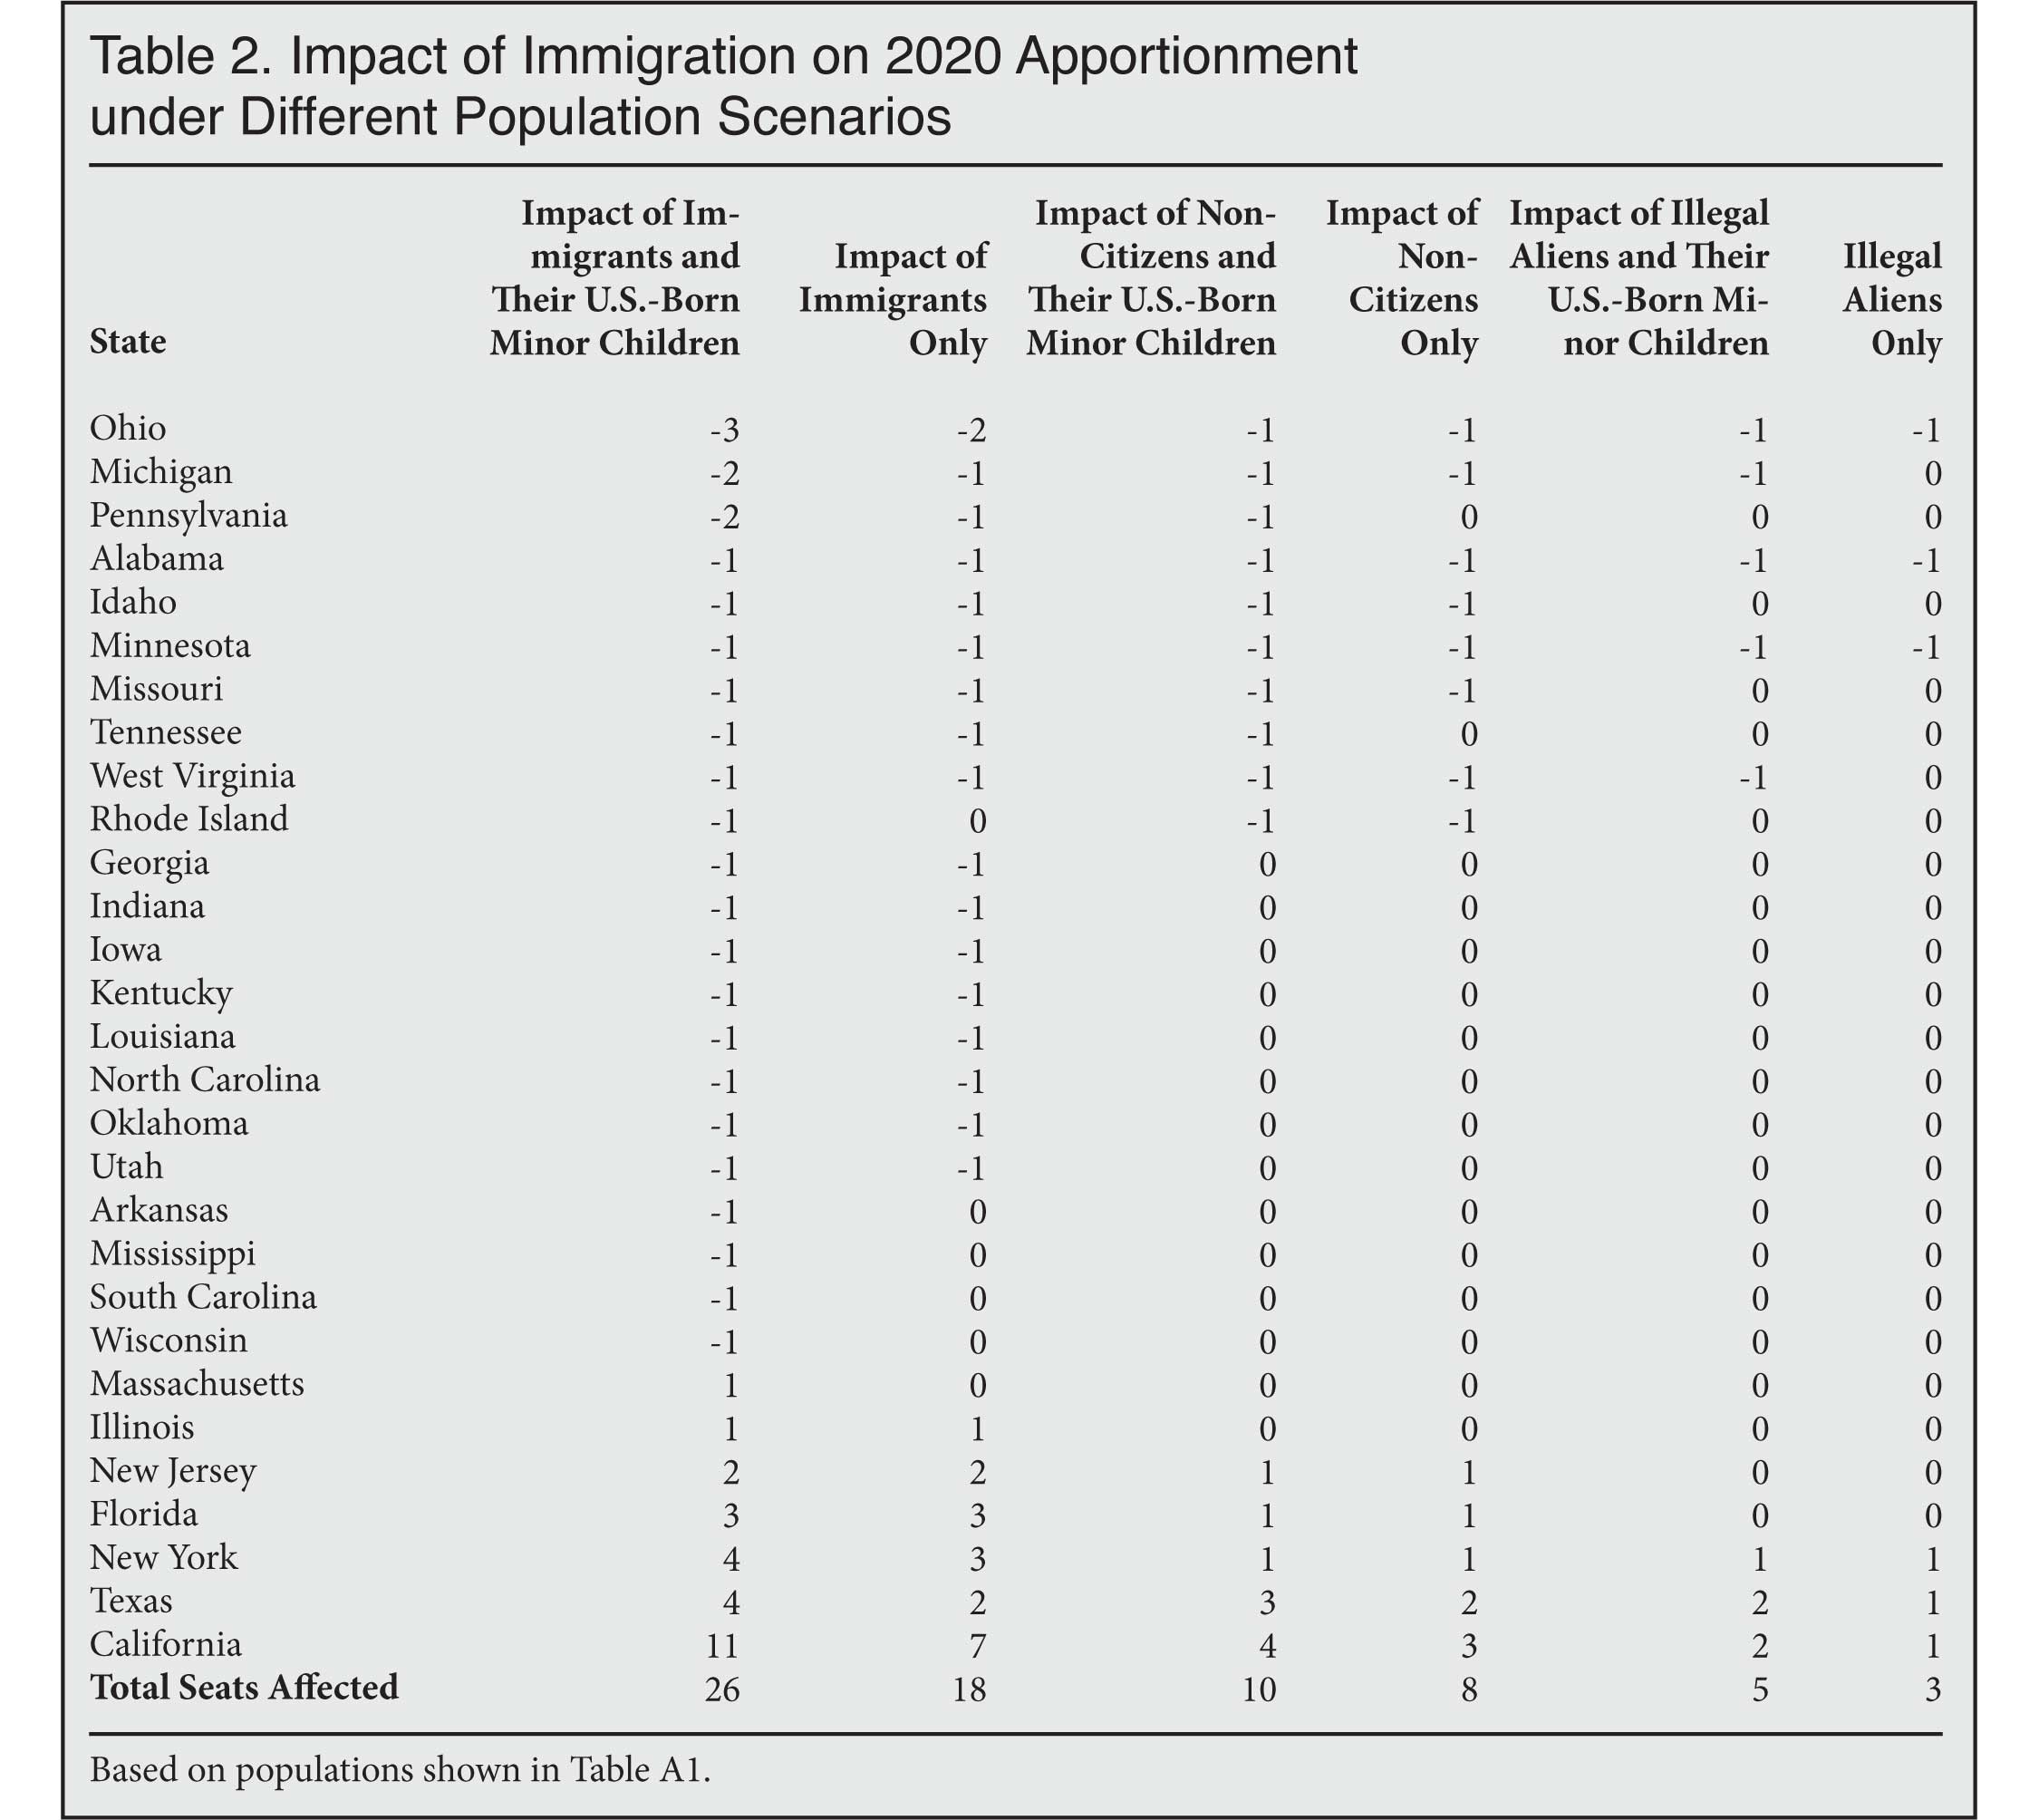 Table: Impact of Immigration on 2020 Apportionment under Different Population Scenarios